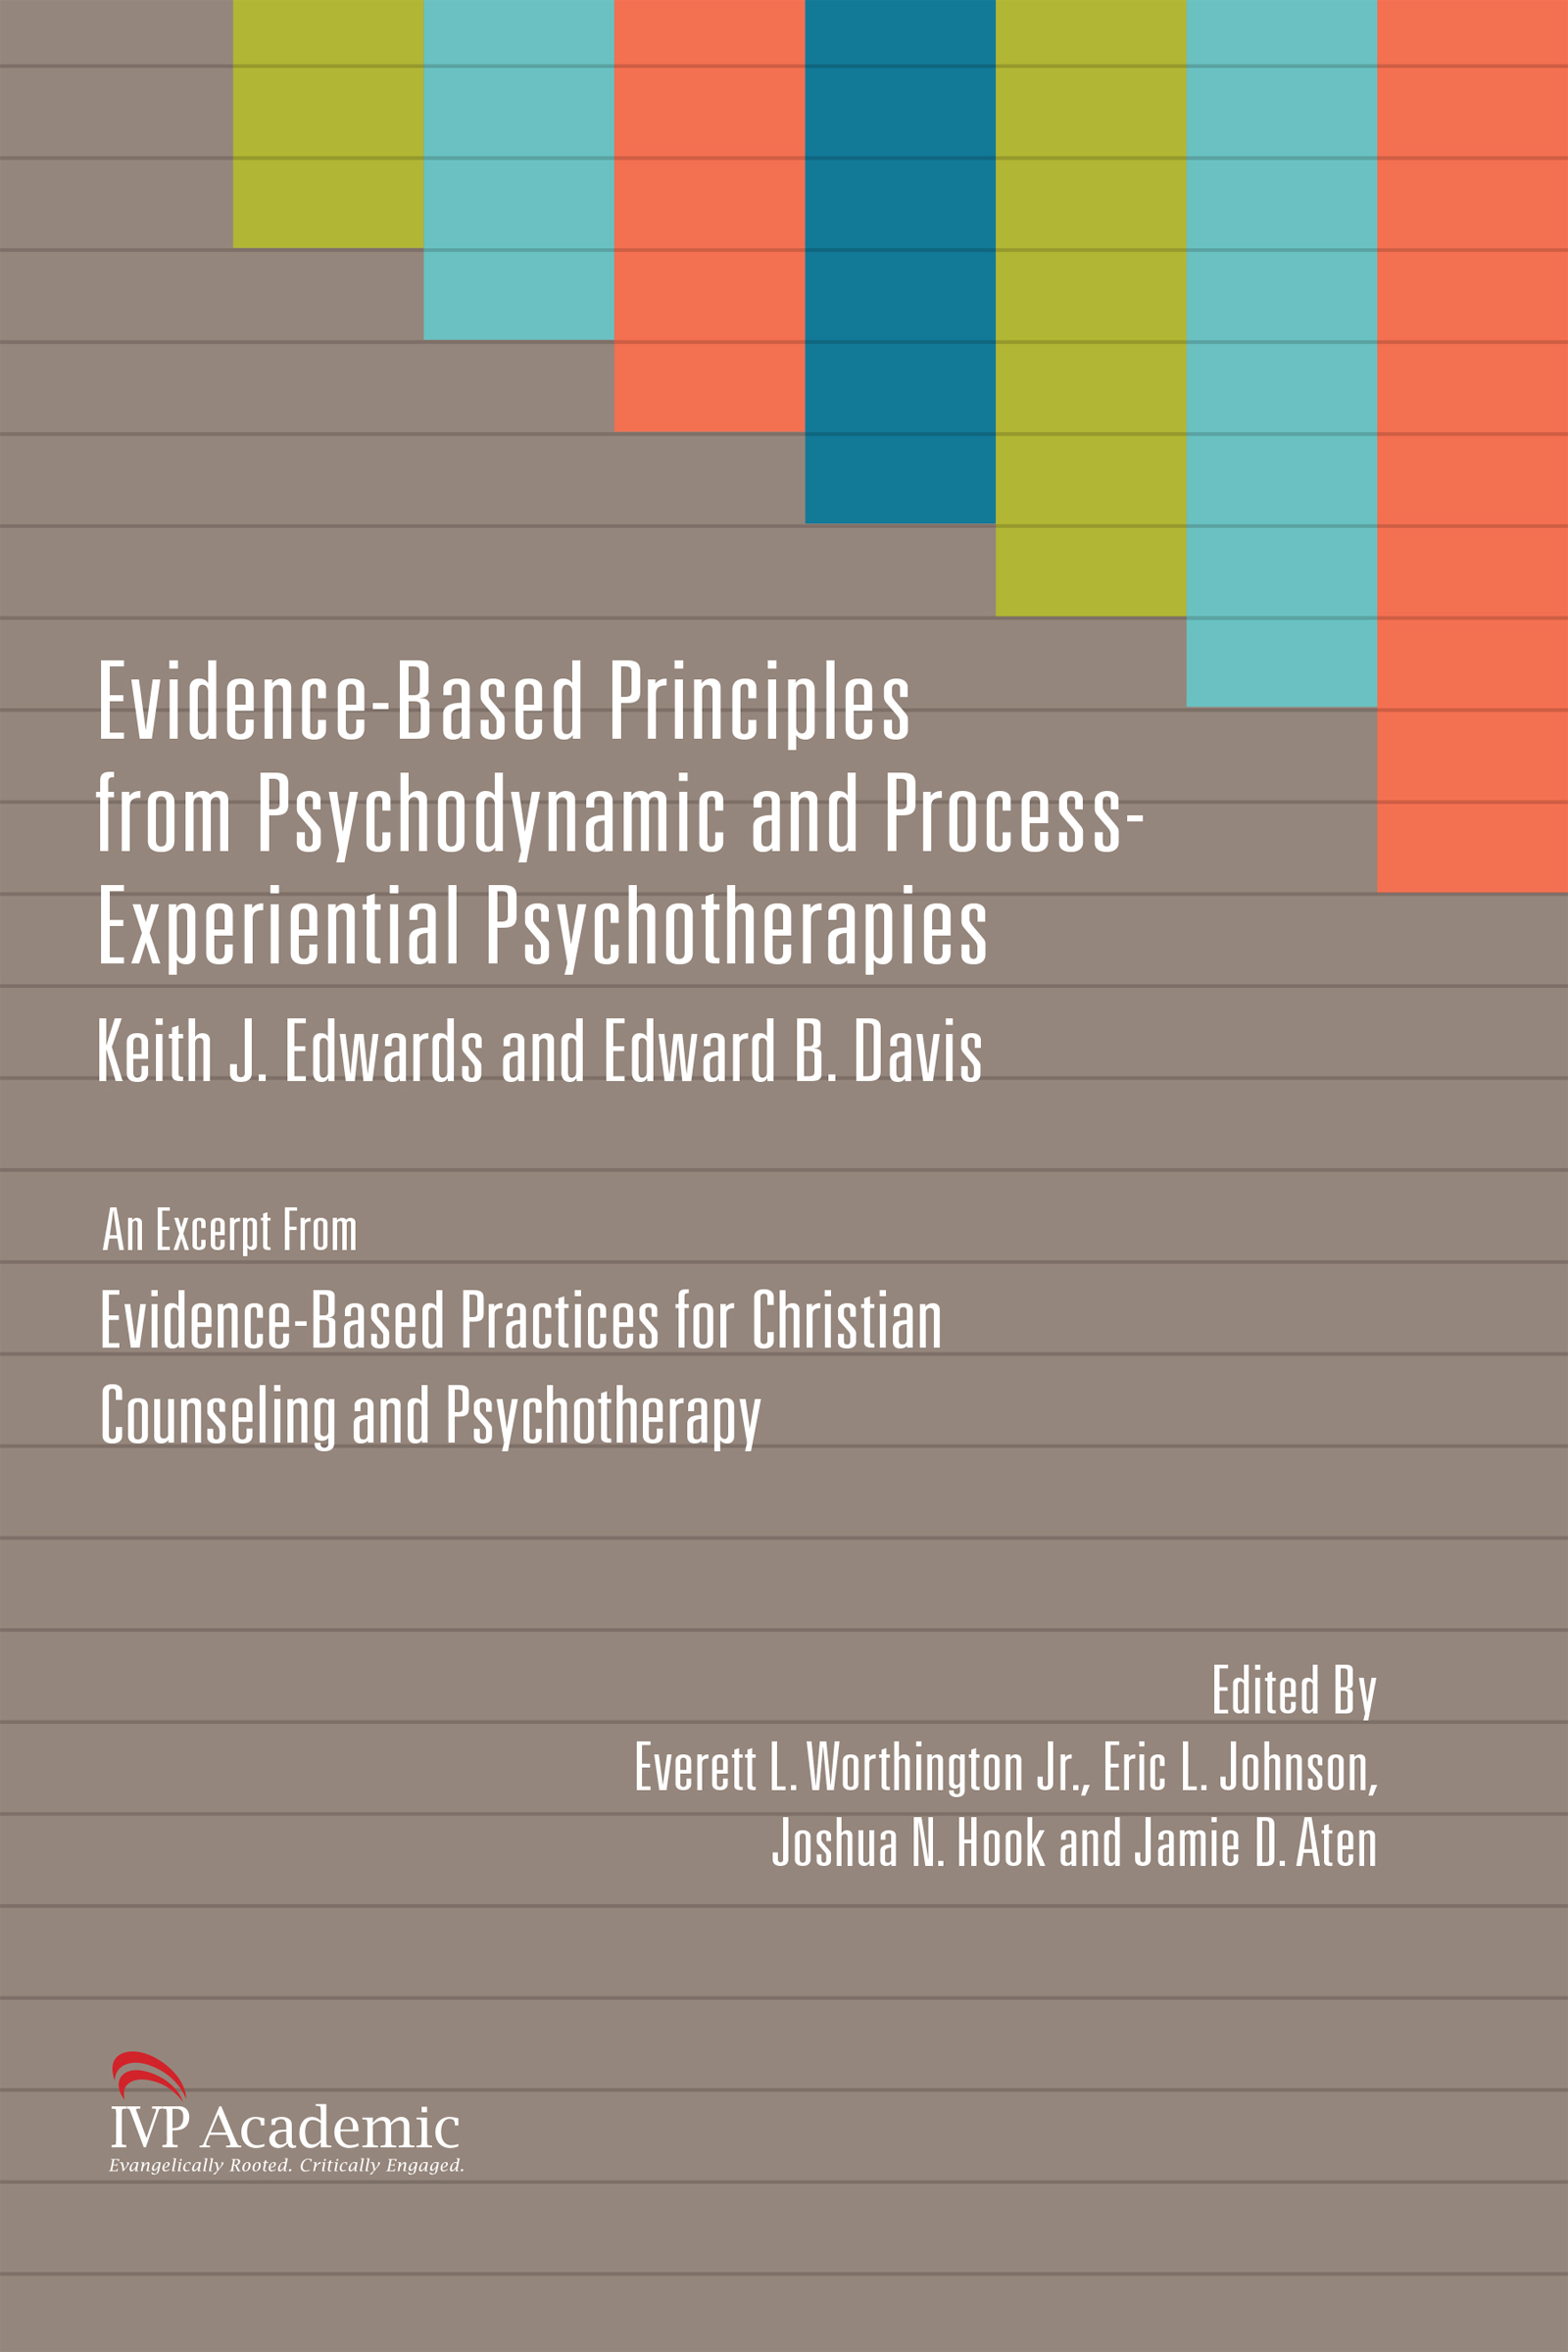 This image is the cover for the book Evidence-Based Principles from Psychodynamic and Process-Experiential Psychotherapies, Christian Association for Psychological Studies Books